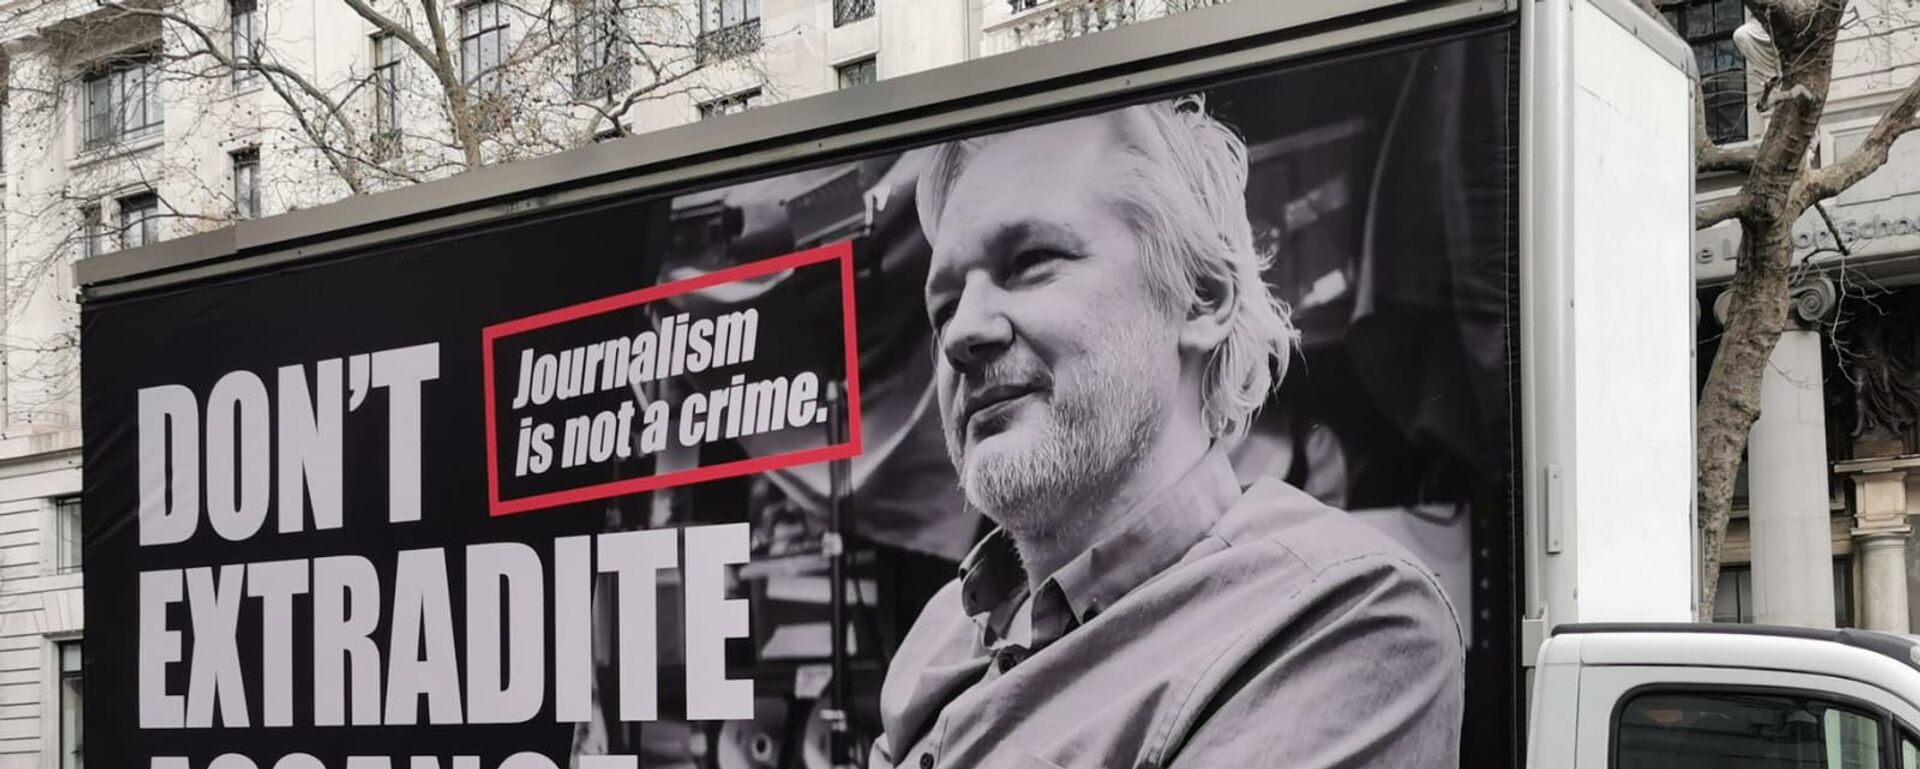 Protesters gather outside Australia House in London on Saturday for a rally in support of WikiLeaks founder Julian Assange ahead of extradition hearings. - Sputnik Afrique, 1920, 10.12.2021